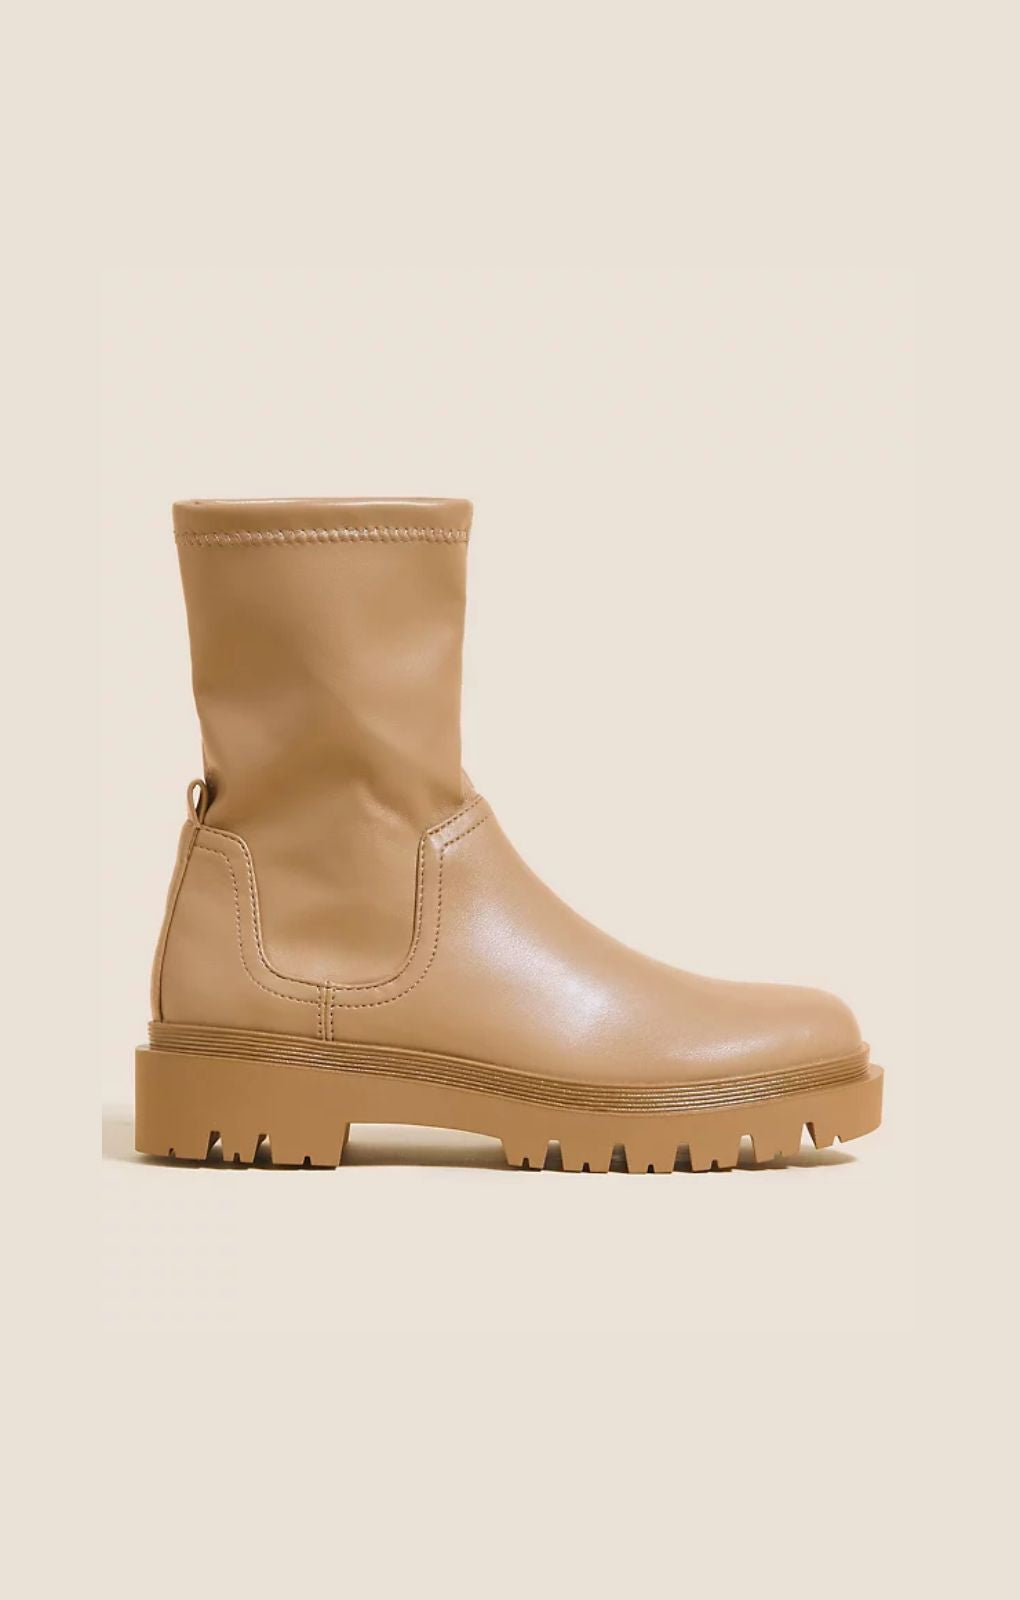 M&S Chunky Cleated Flatform Ankle Boots product image